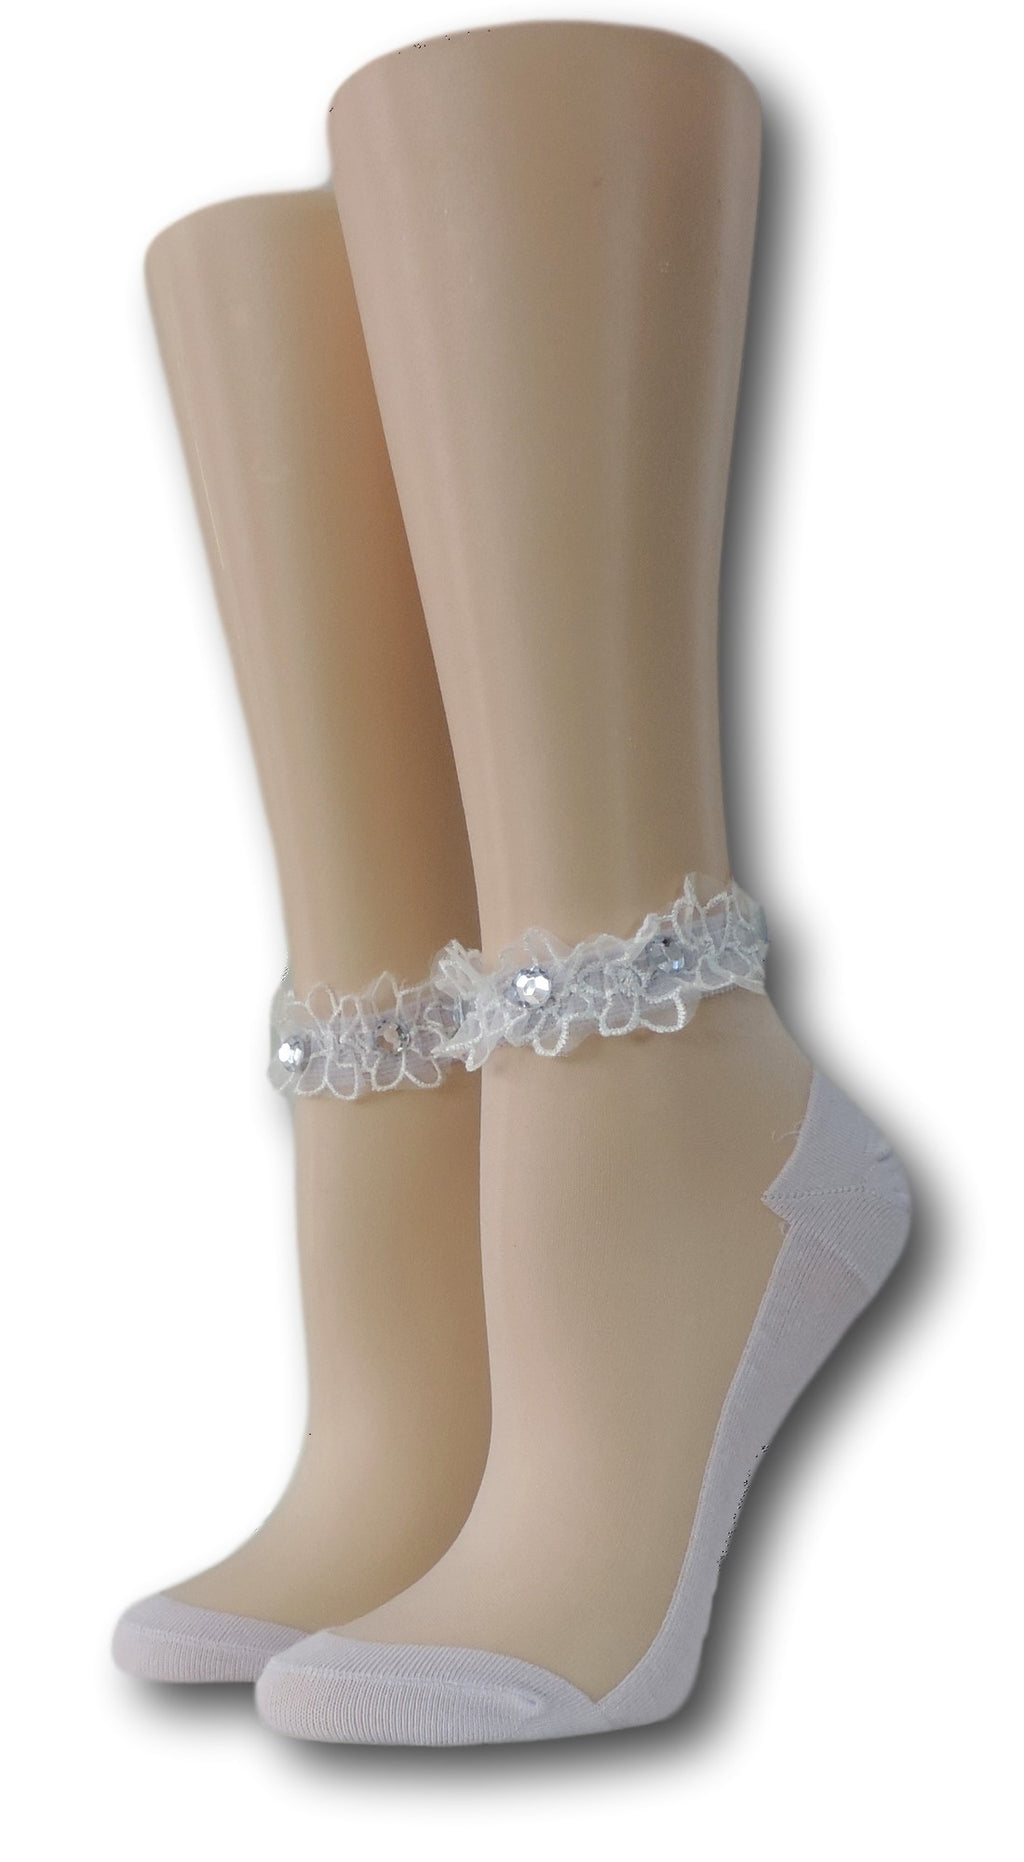 Light Purple Ankle Sheer Socks with beads